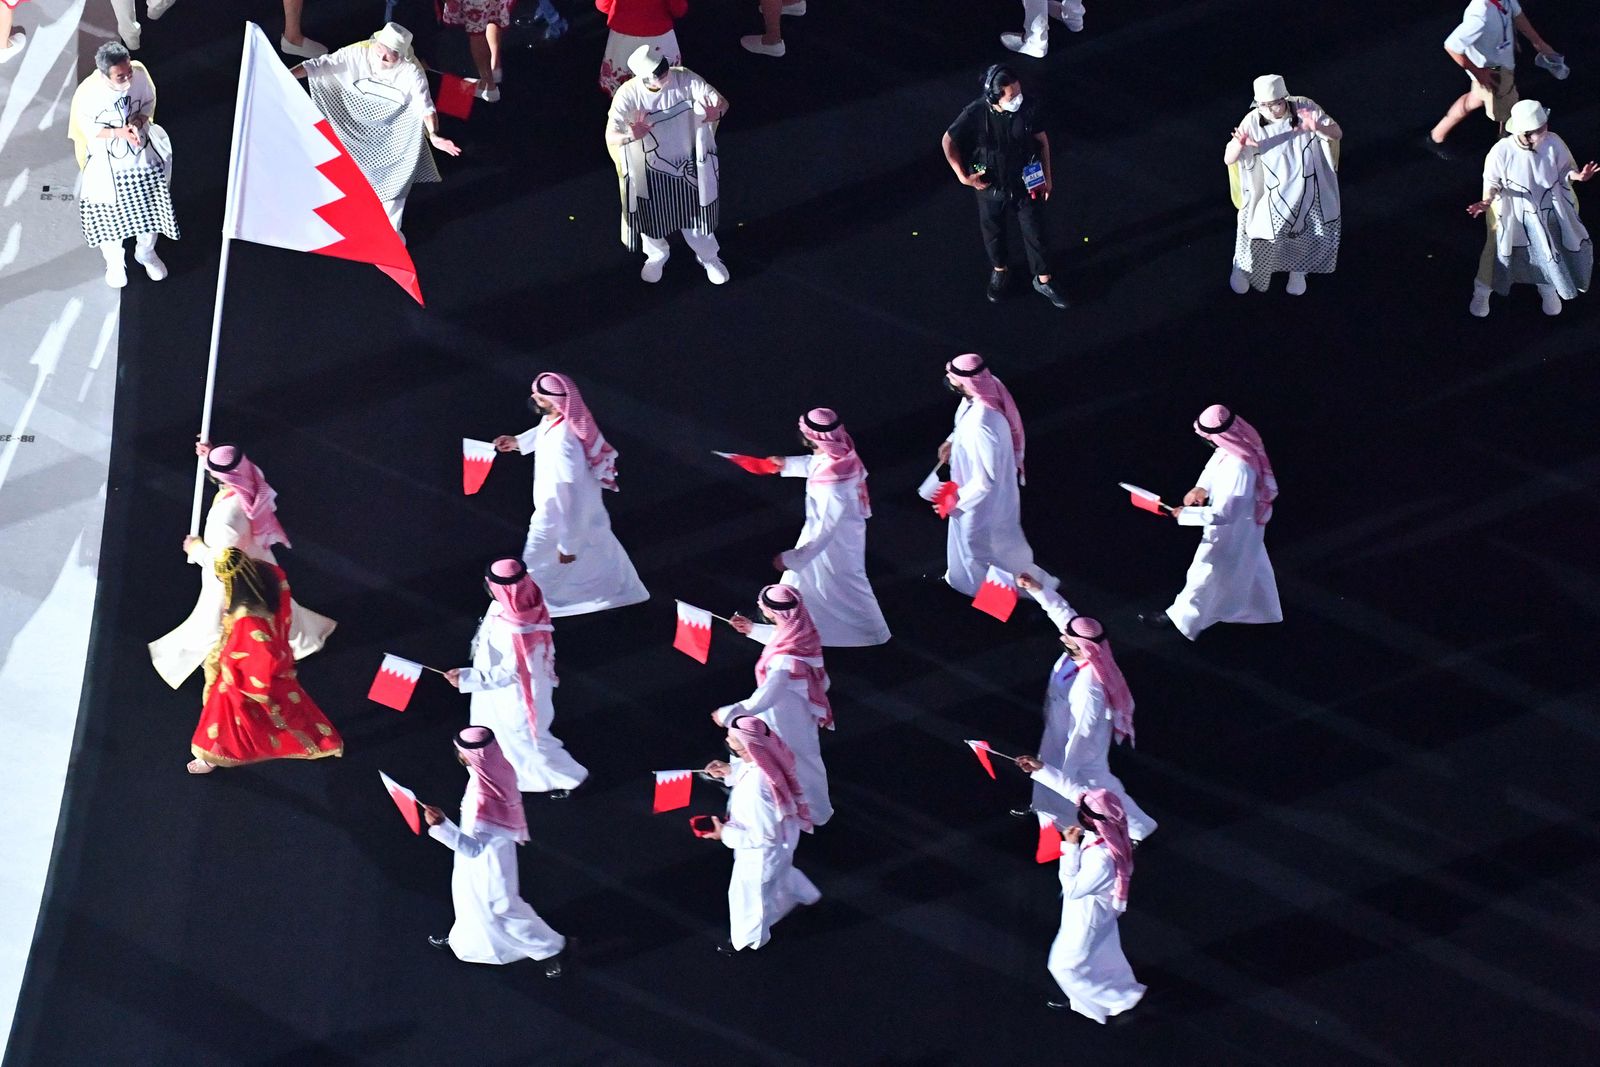 An overview shows Bahrain's delegation entering the Olympic Stadium during the opening ceremony of the Tokyo 2020 Olympic Games, in Tokyo, on July 23, 2021. (Photo by Antonin THUILLIER / AFP) - AFP